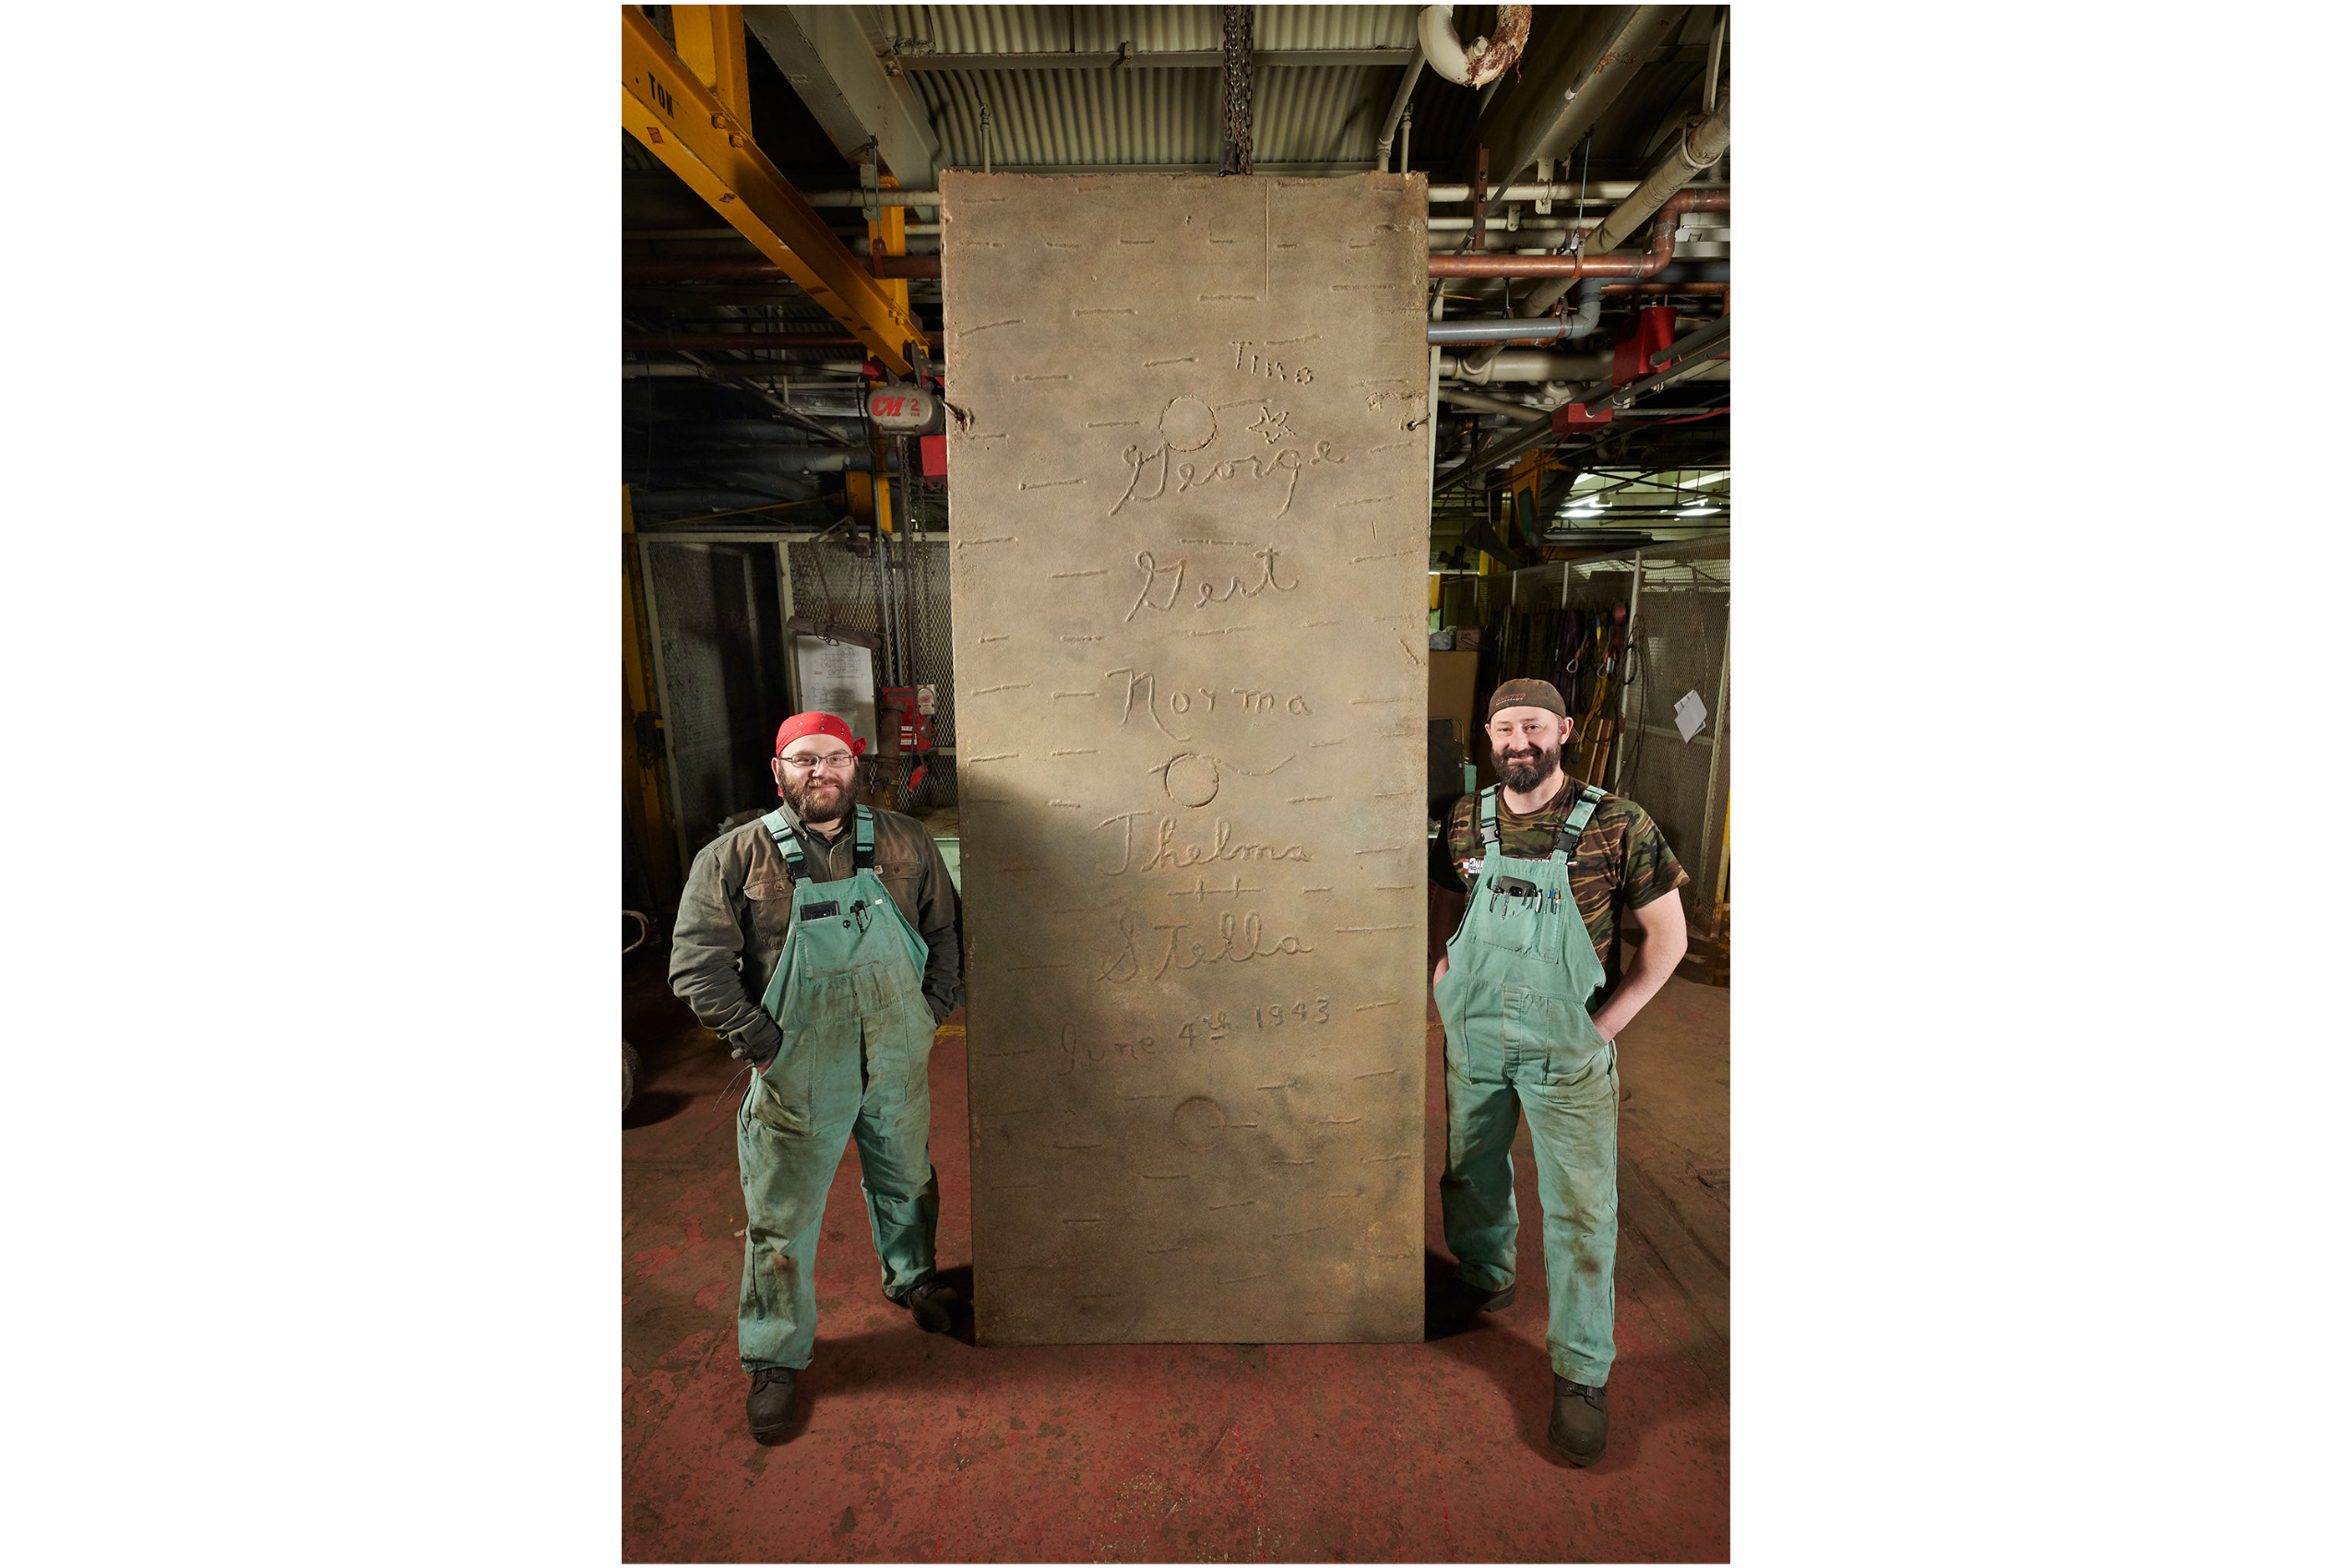 Two steel mill workers in green coveralls pose on either side of a ten-foot-tall steel plate that was created during World War II. The plate features women’s names written in cursive.